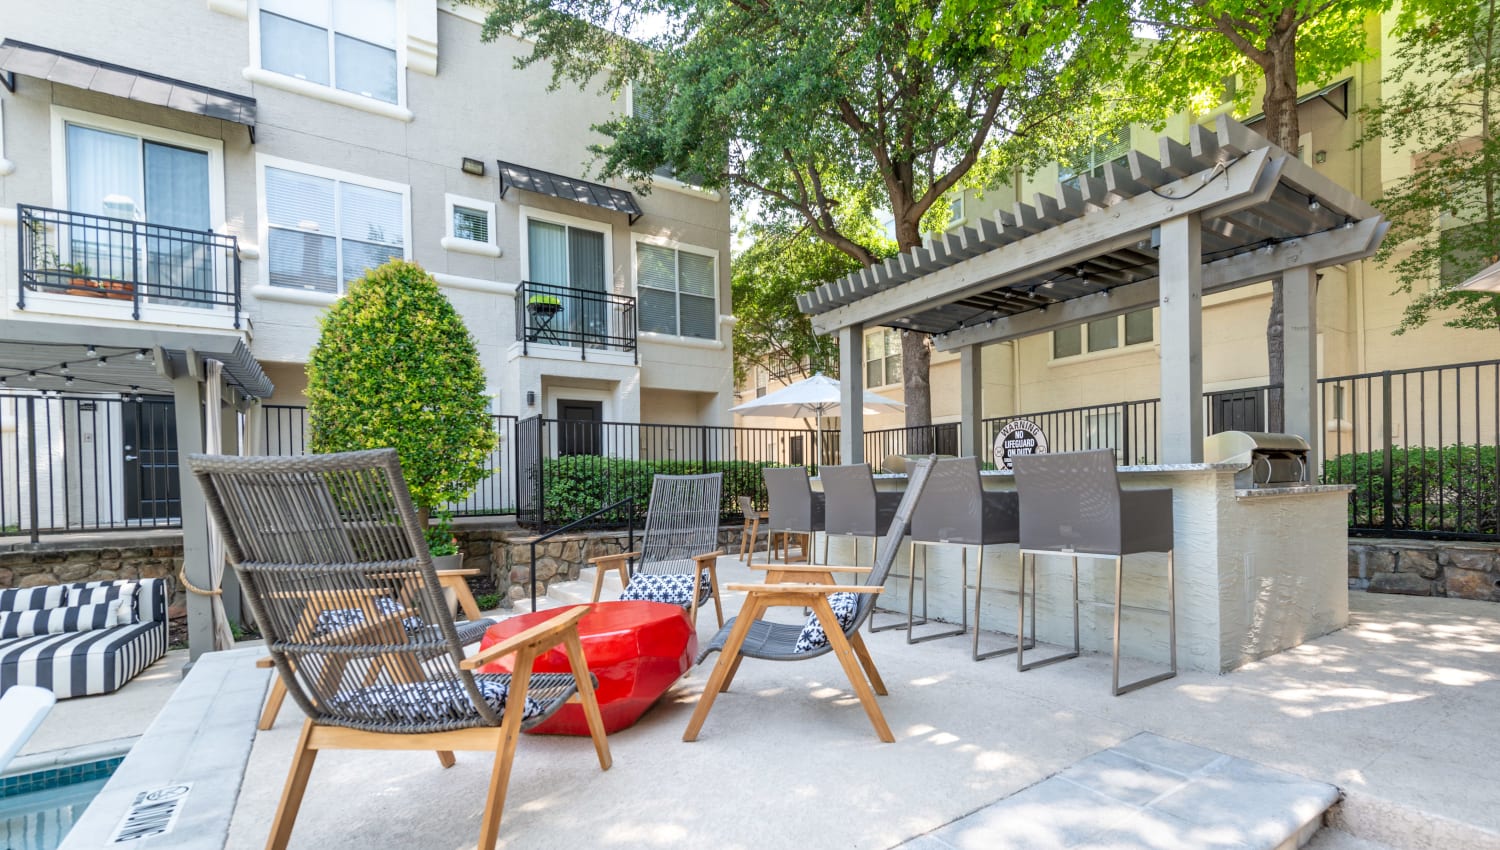 Poolside lounge area and grilling pavilion at 75 West in Dallas, Texas